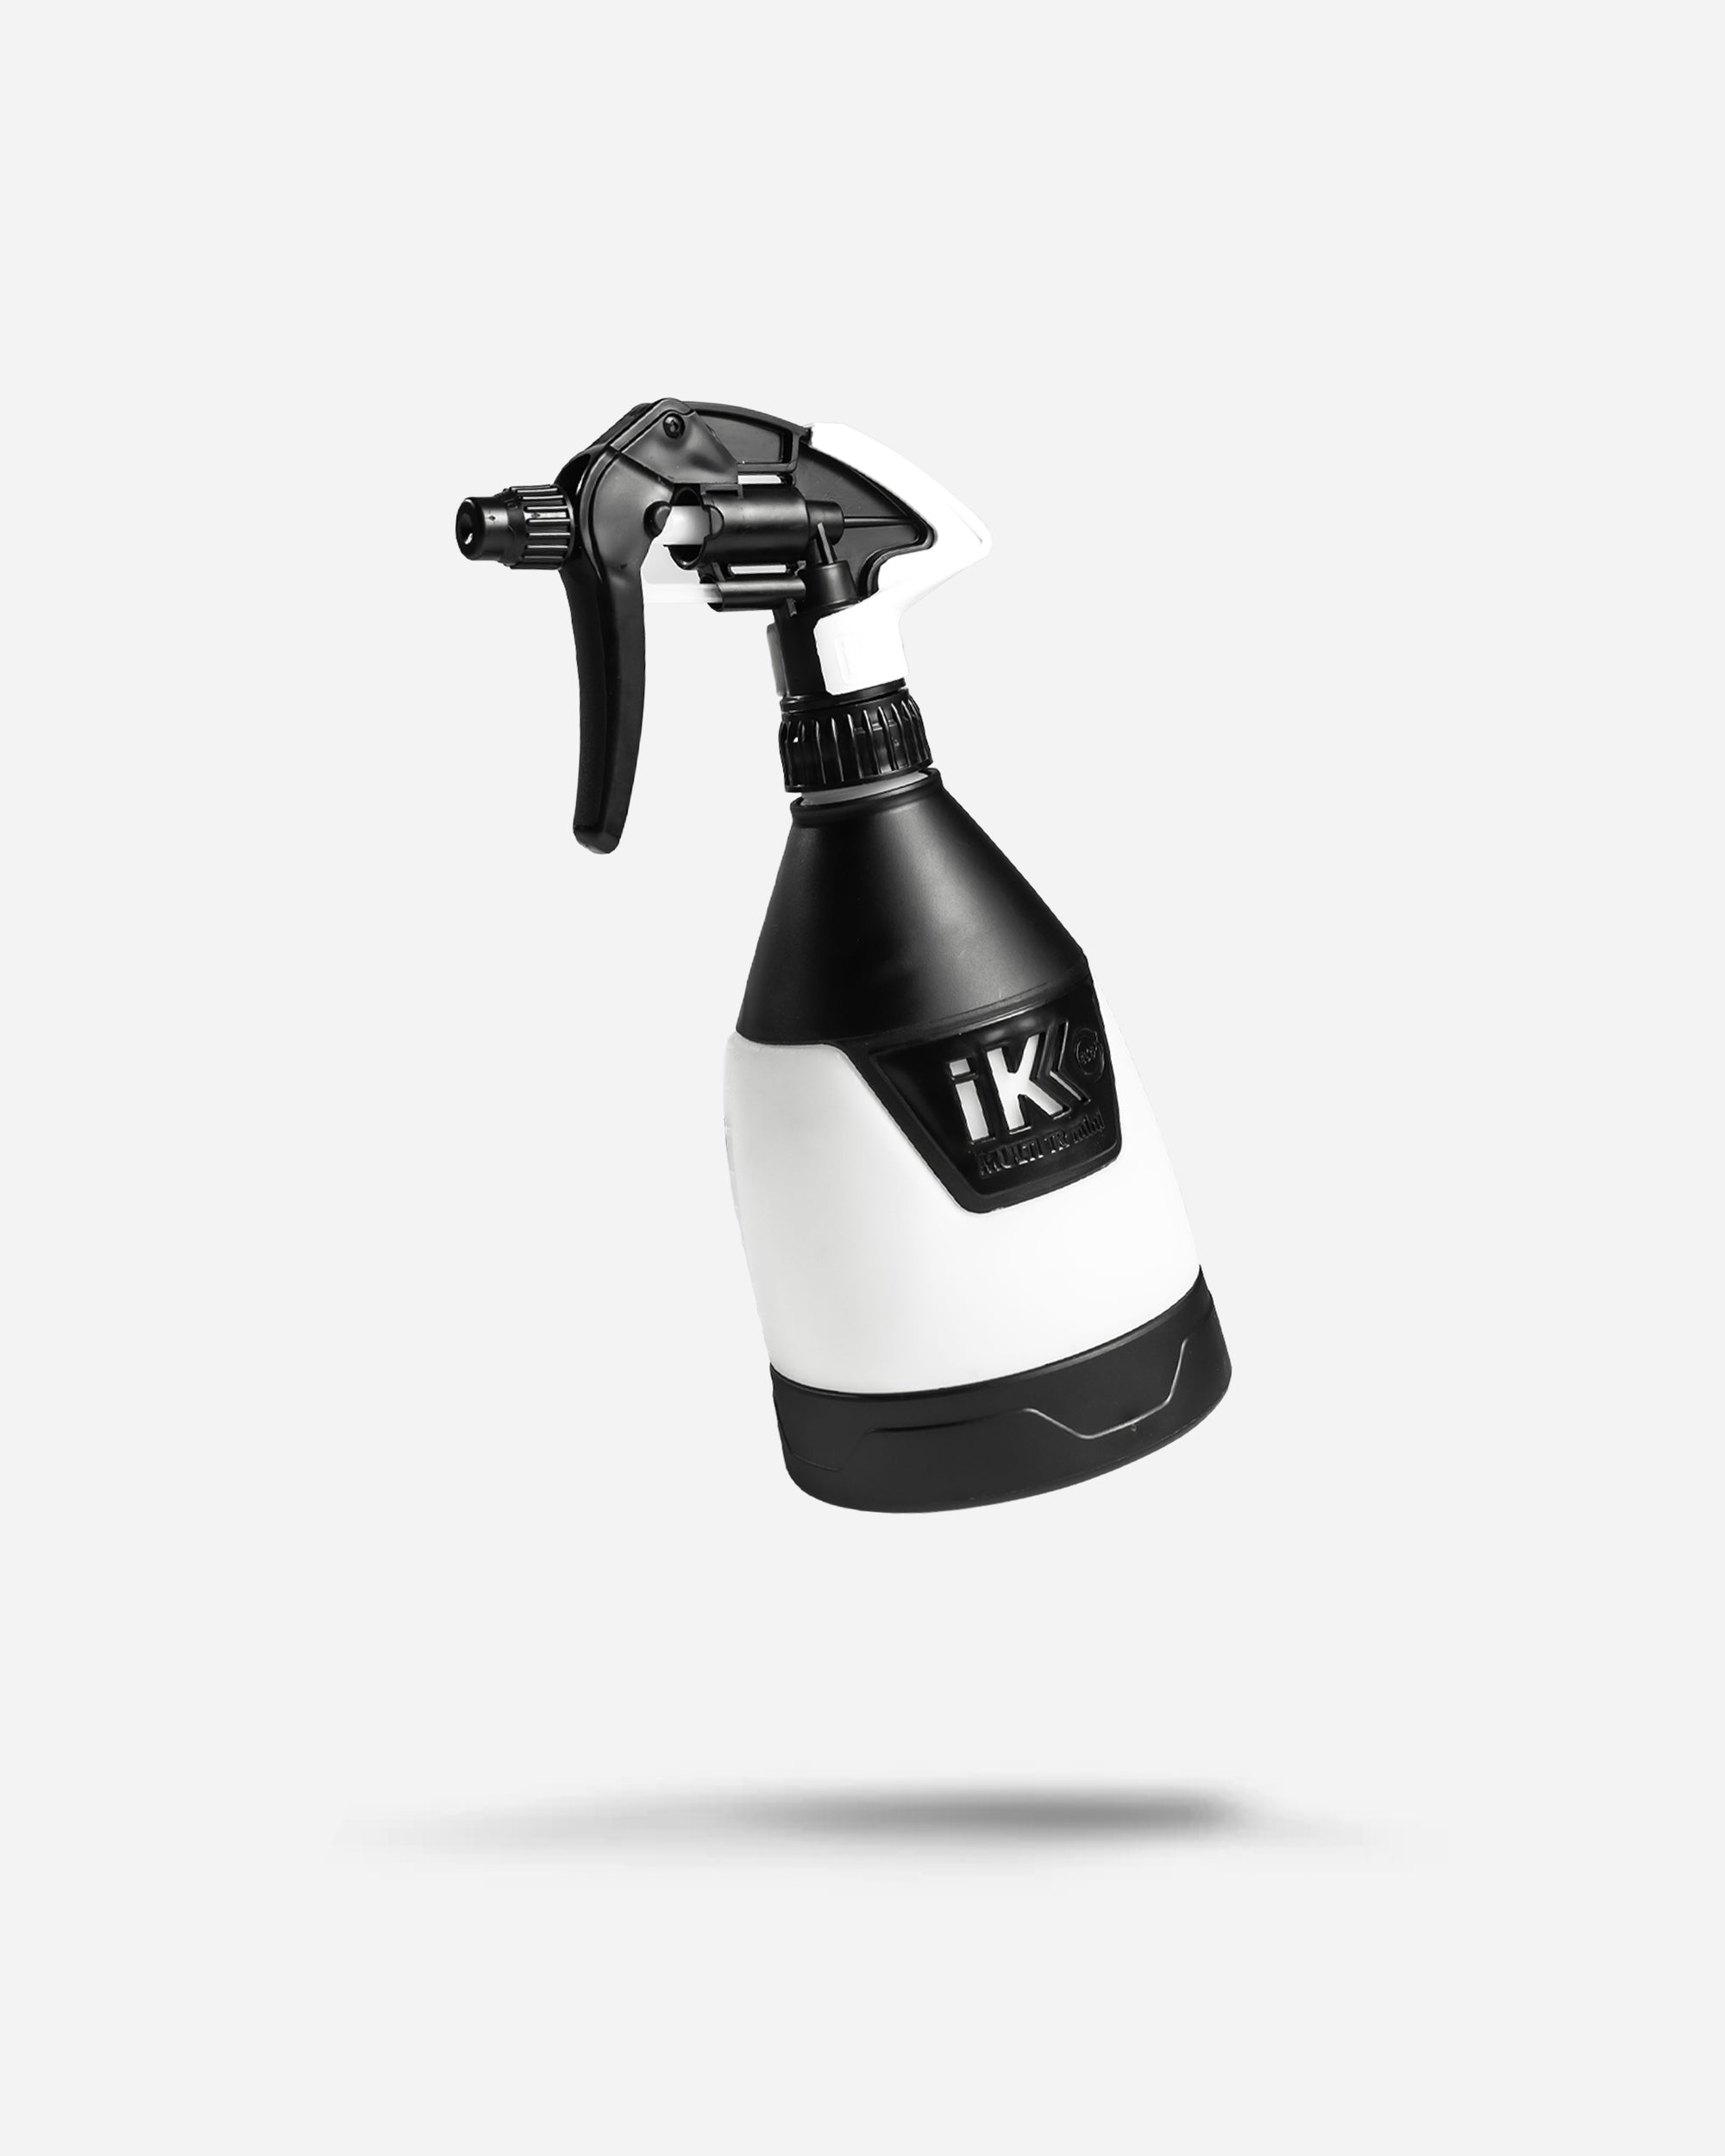  Lumintrail iK Foam PRO 2 Pump Sprayer, Professional Spray Bottle  for Automotive Cleaning, Detailing, and Industrial Cleaning, Bundle with a  Keychain Light : Automotive